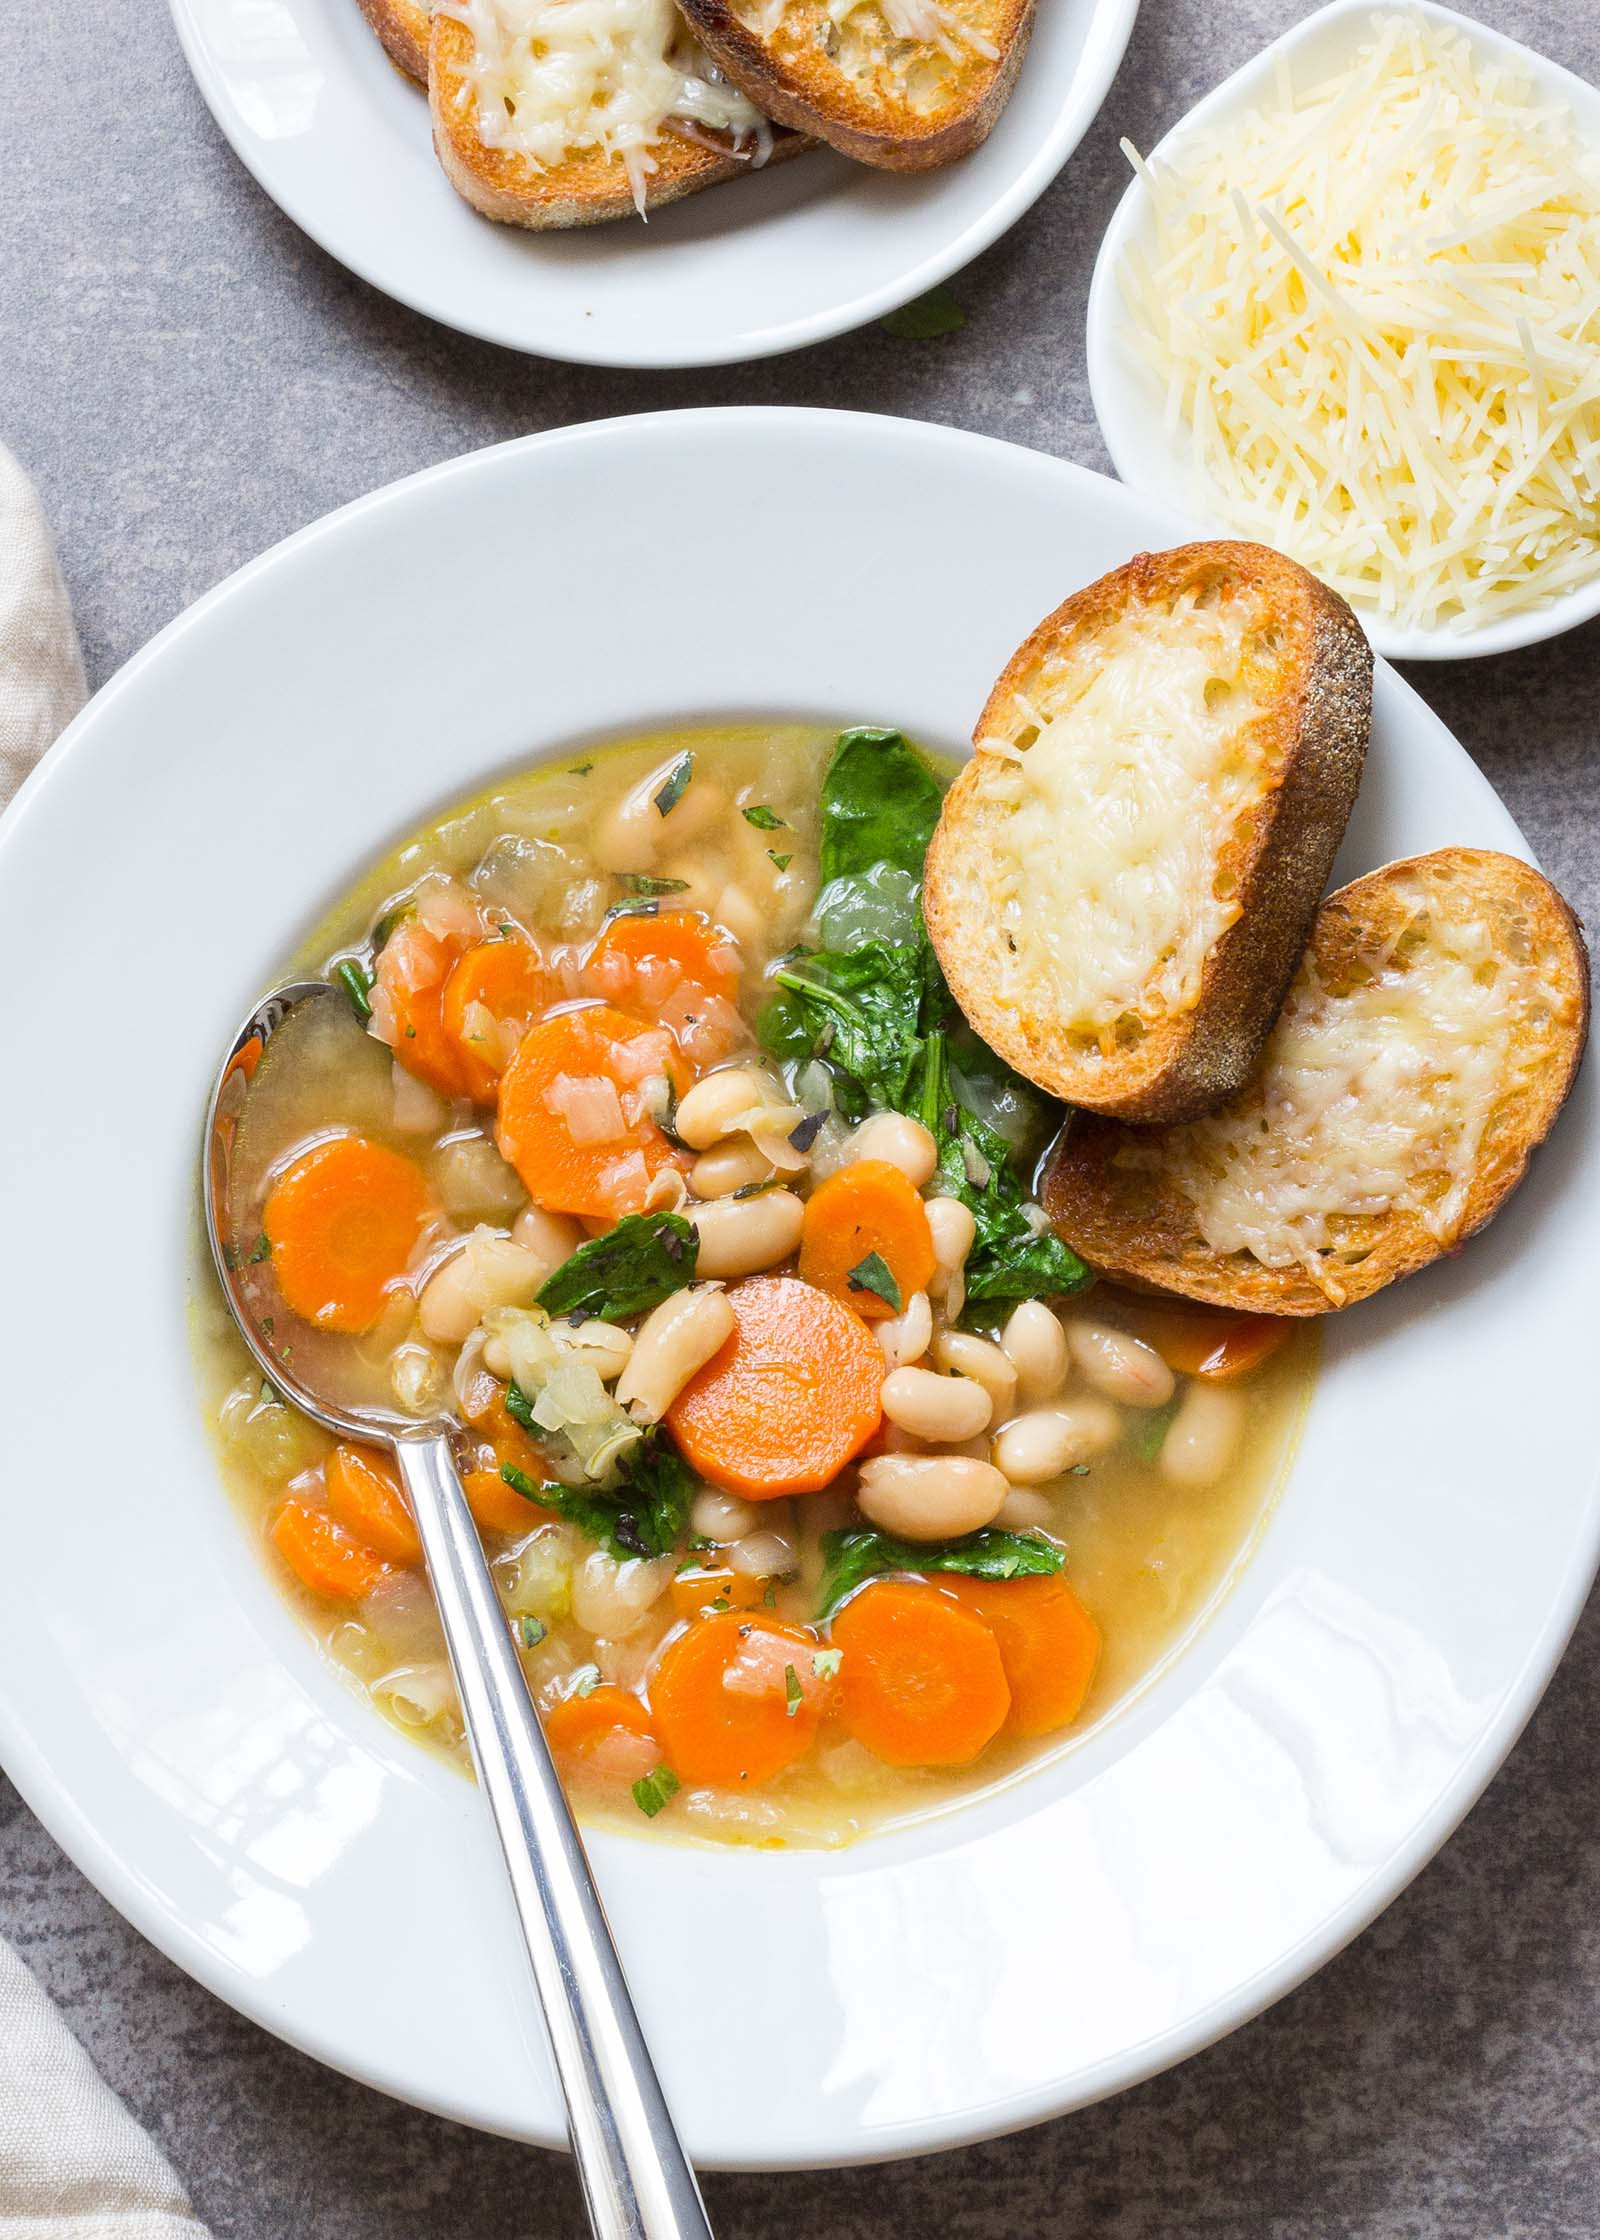 Soup Ideas For Dinner
 Easy Tuscan Bean Soup Recipe